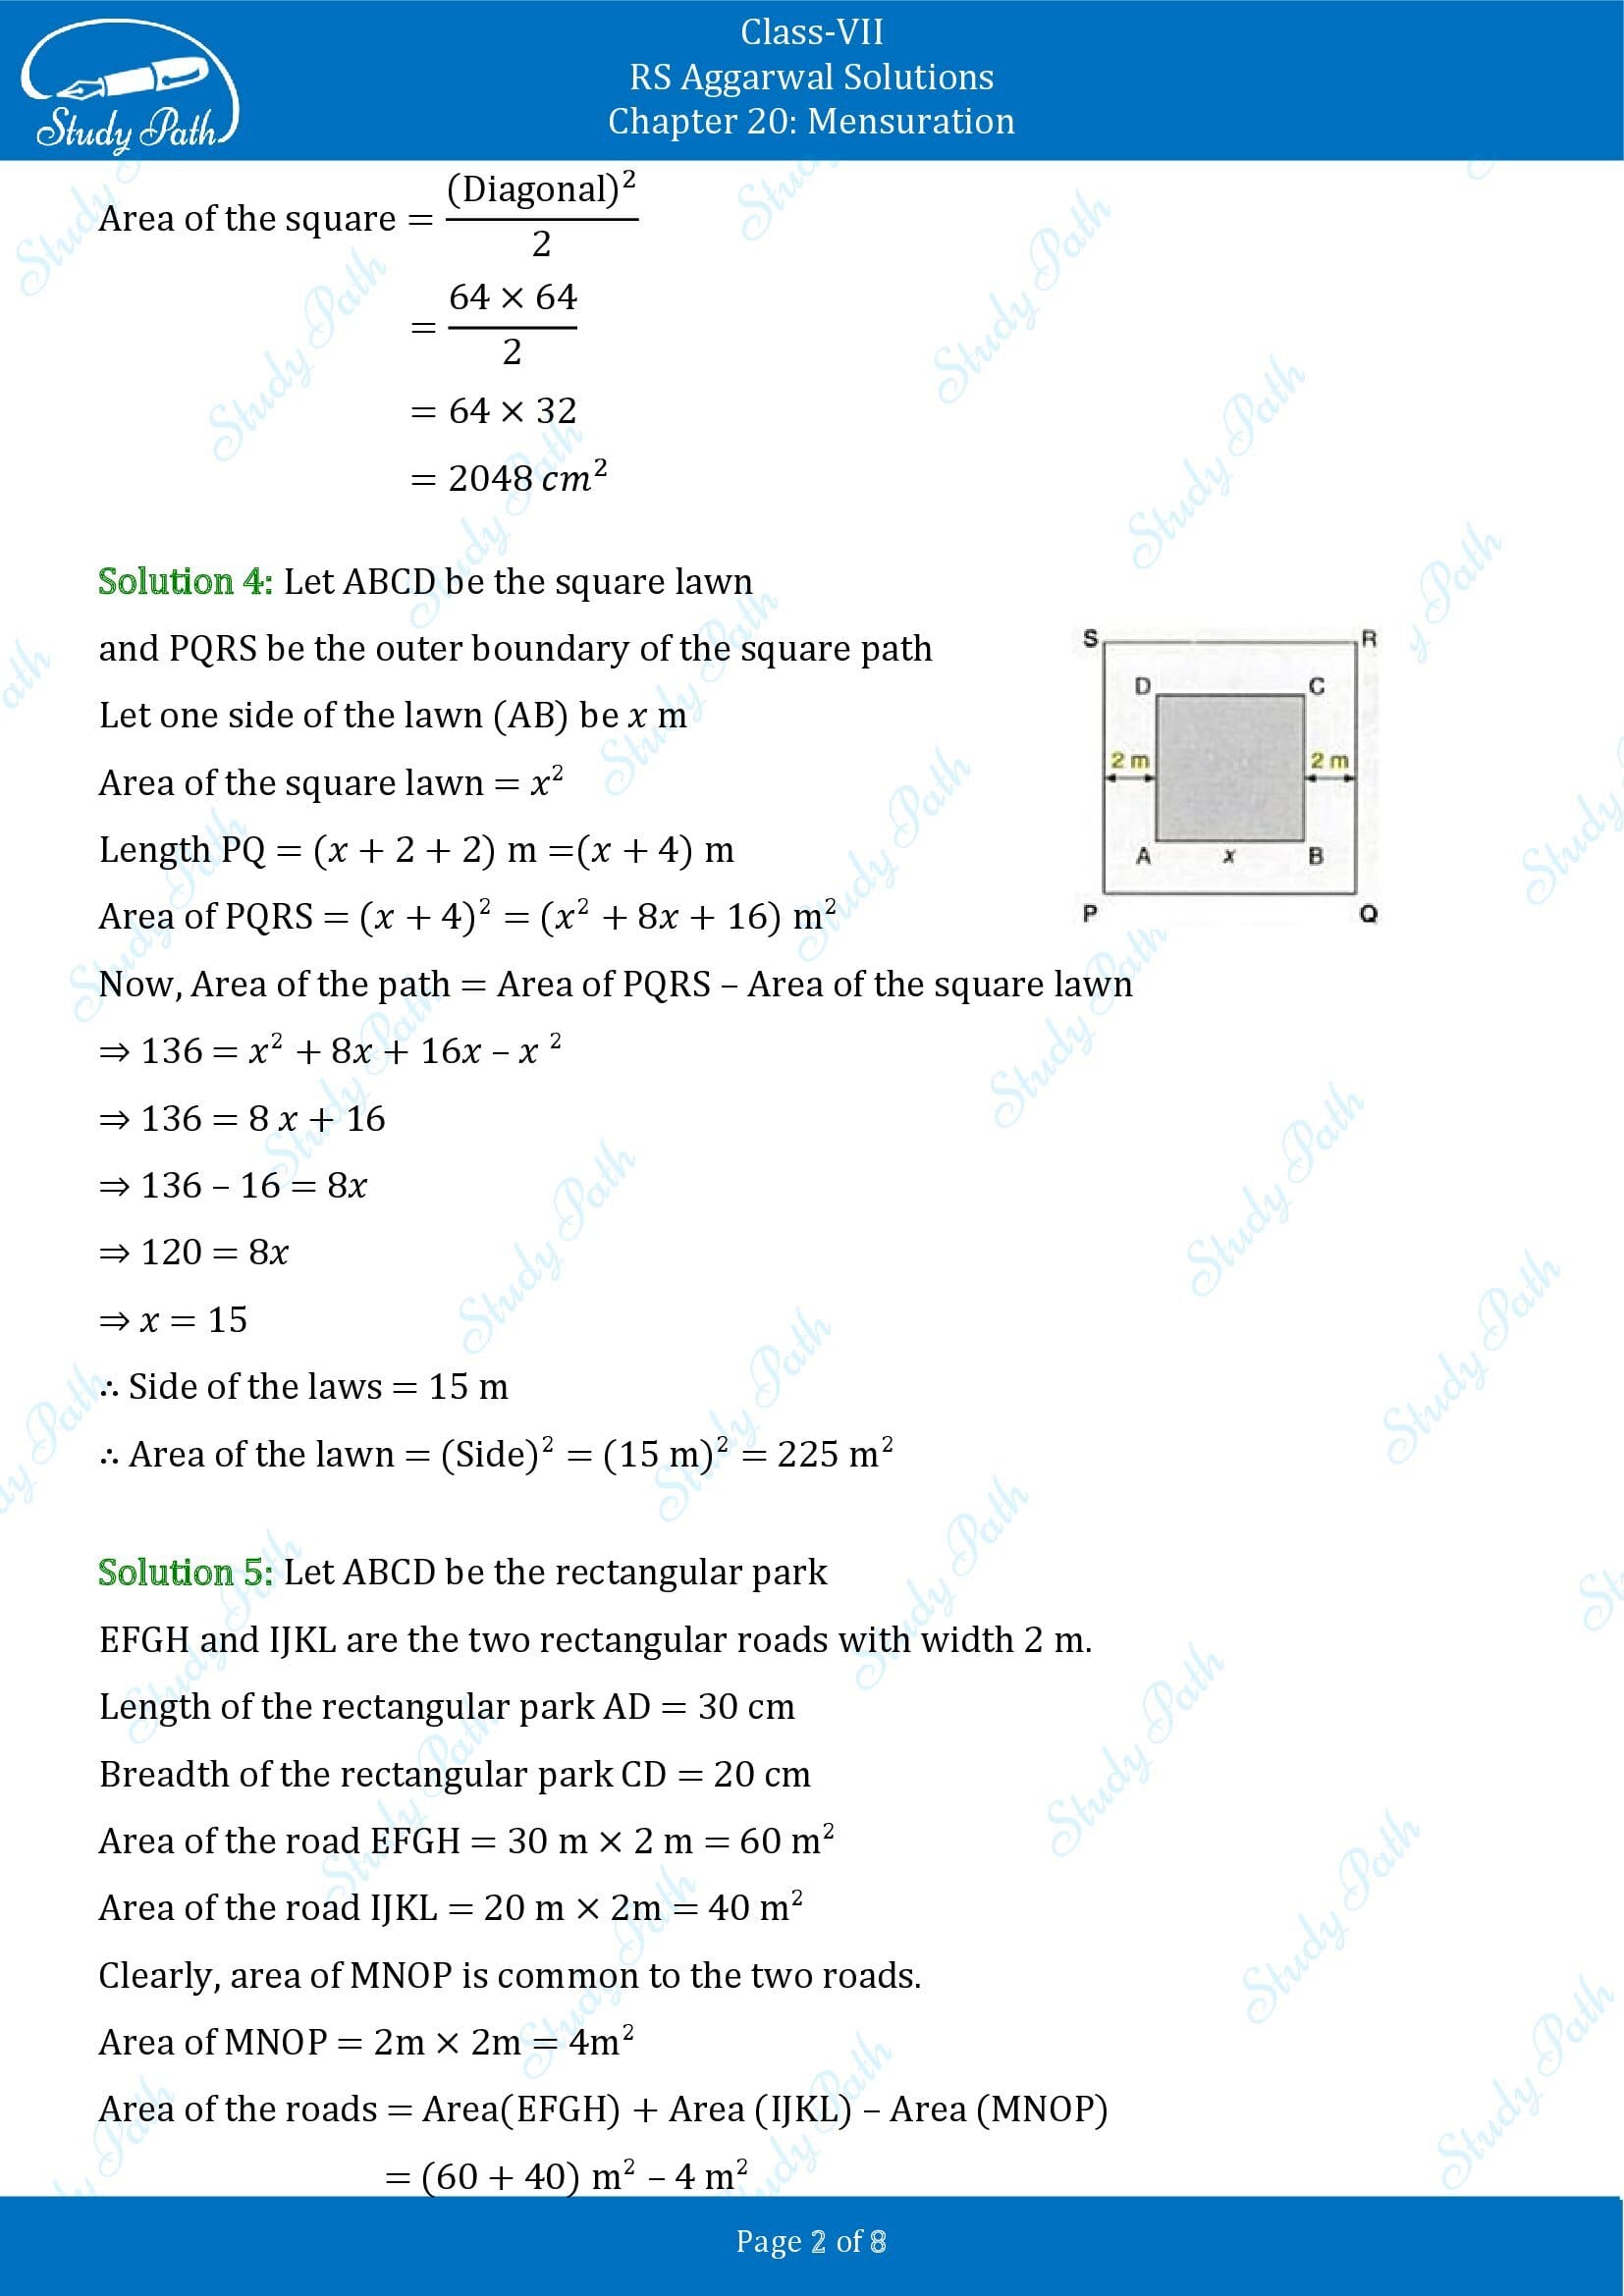 RS Aggarwal Solutions Class 7 Chapter 20 Mensuration Test Paper 20 0002